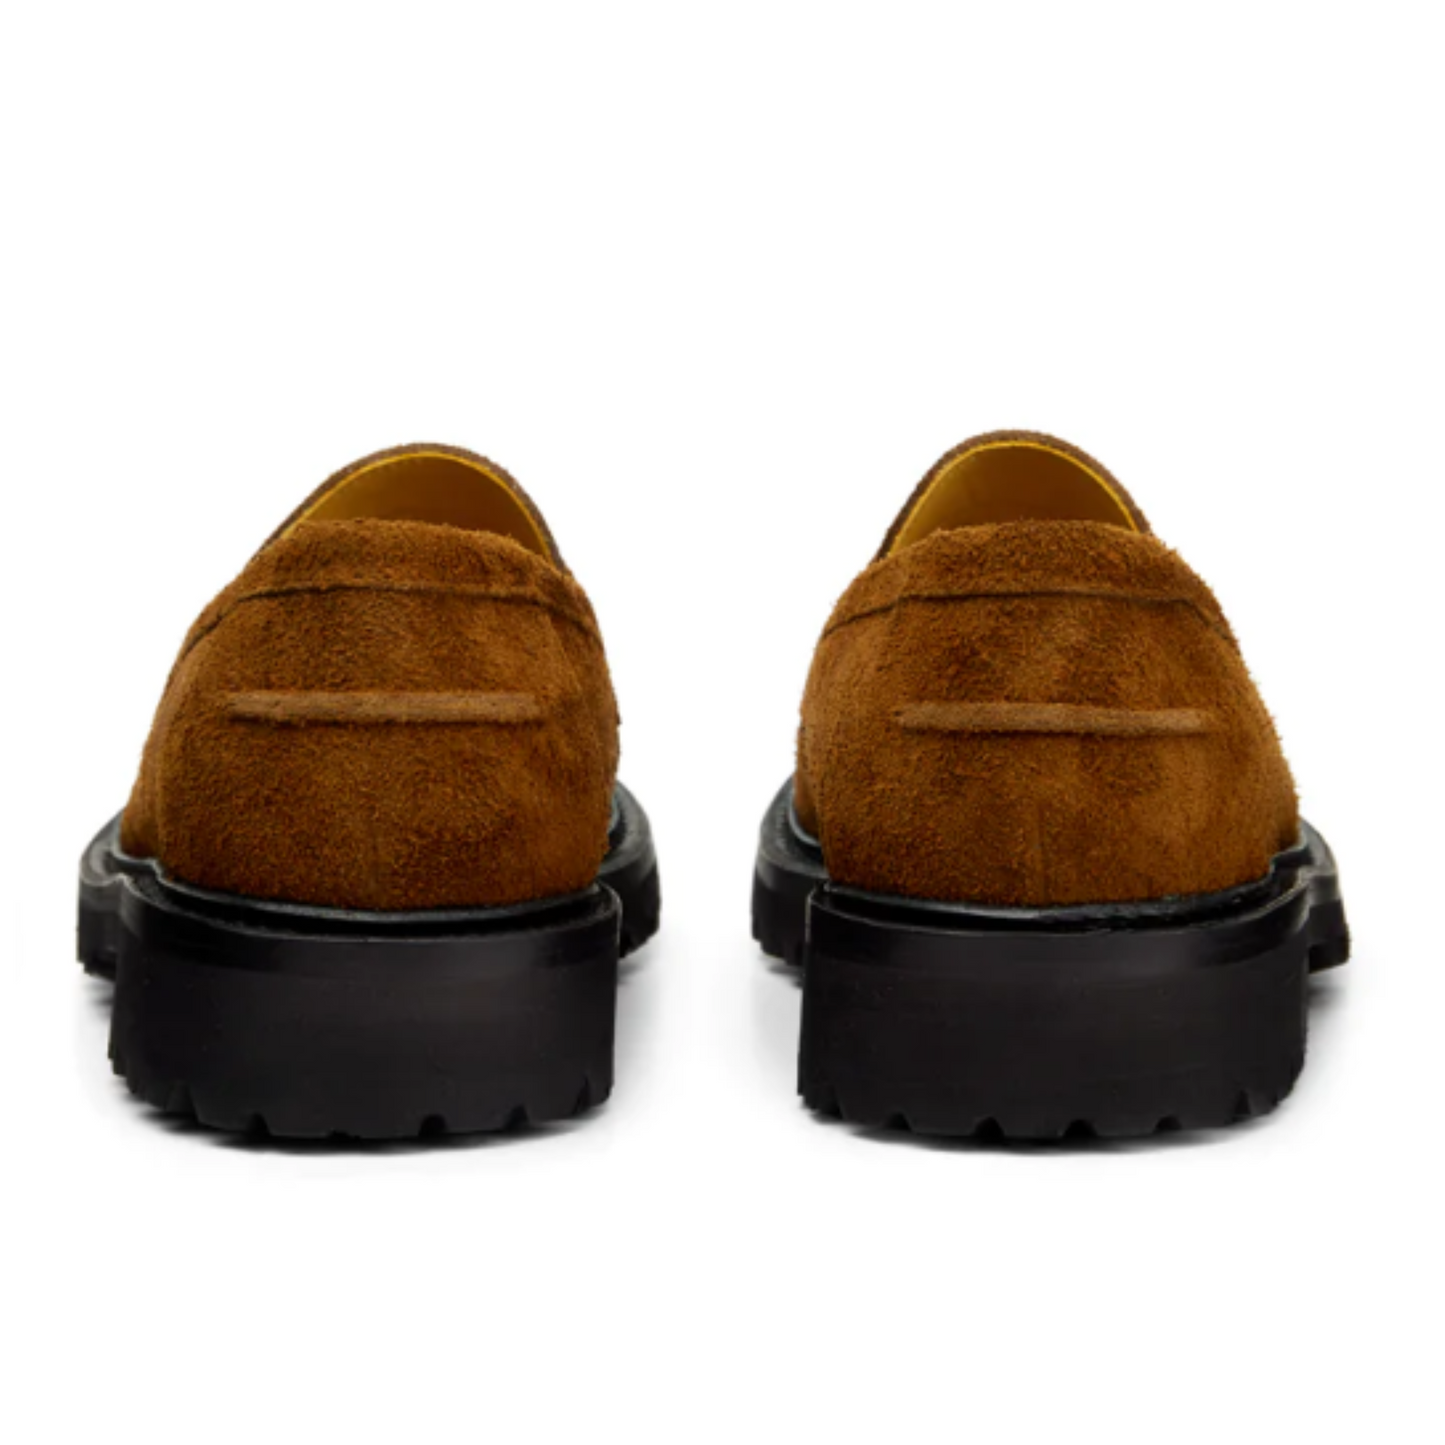 Tailor Made Handmade Tobaccos Suede Tassels Slip On Moccasins Loafers Shoes